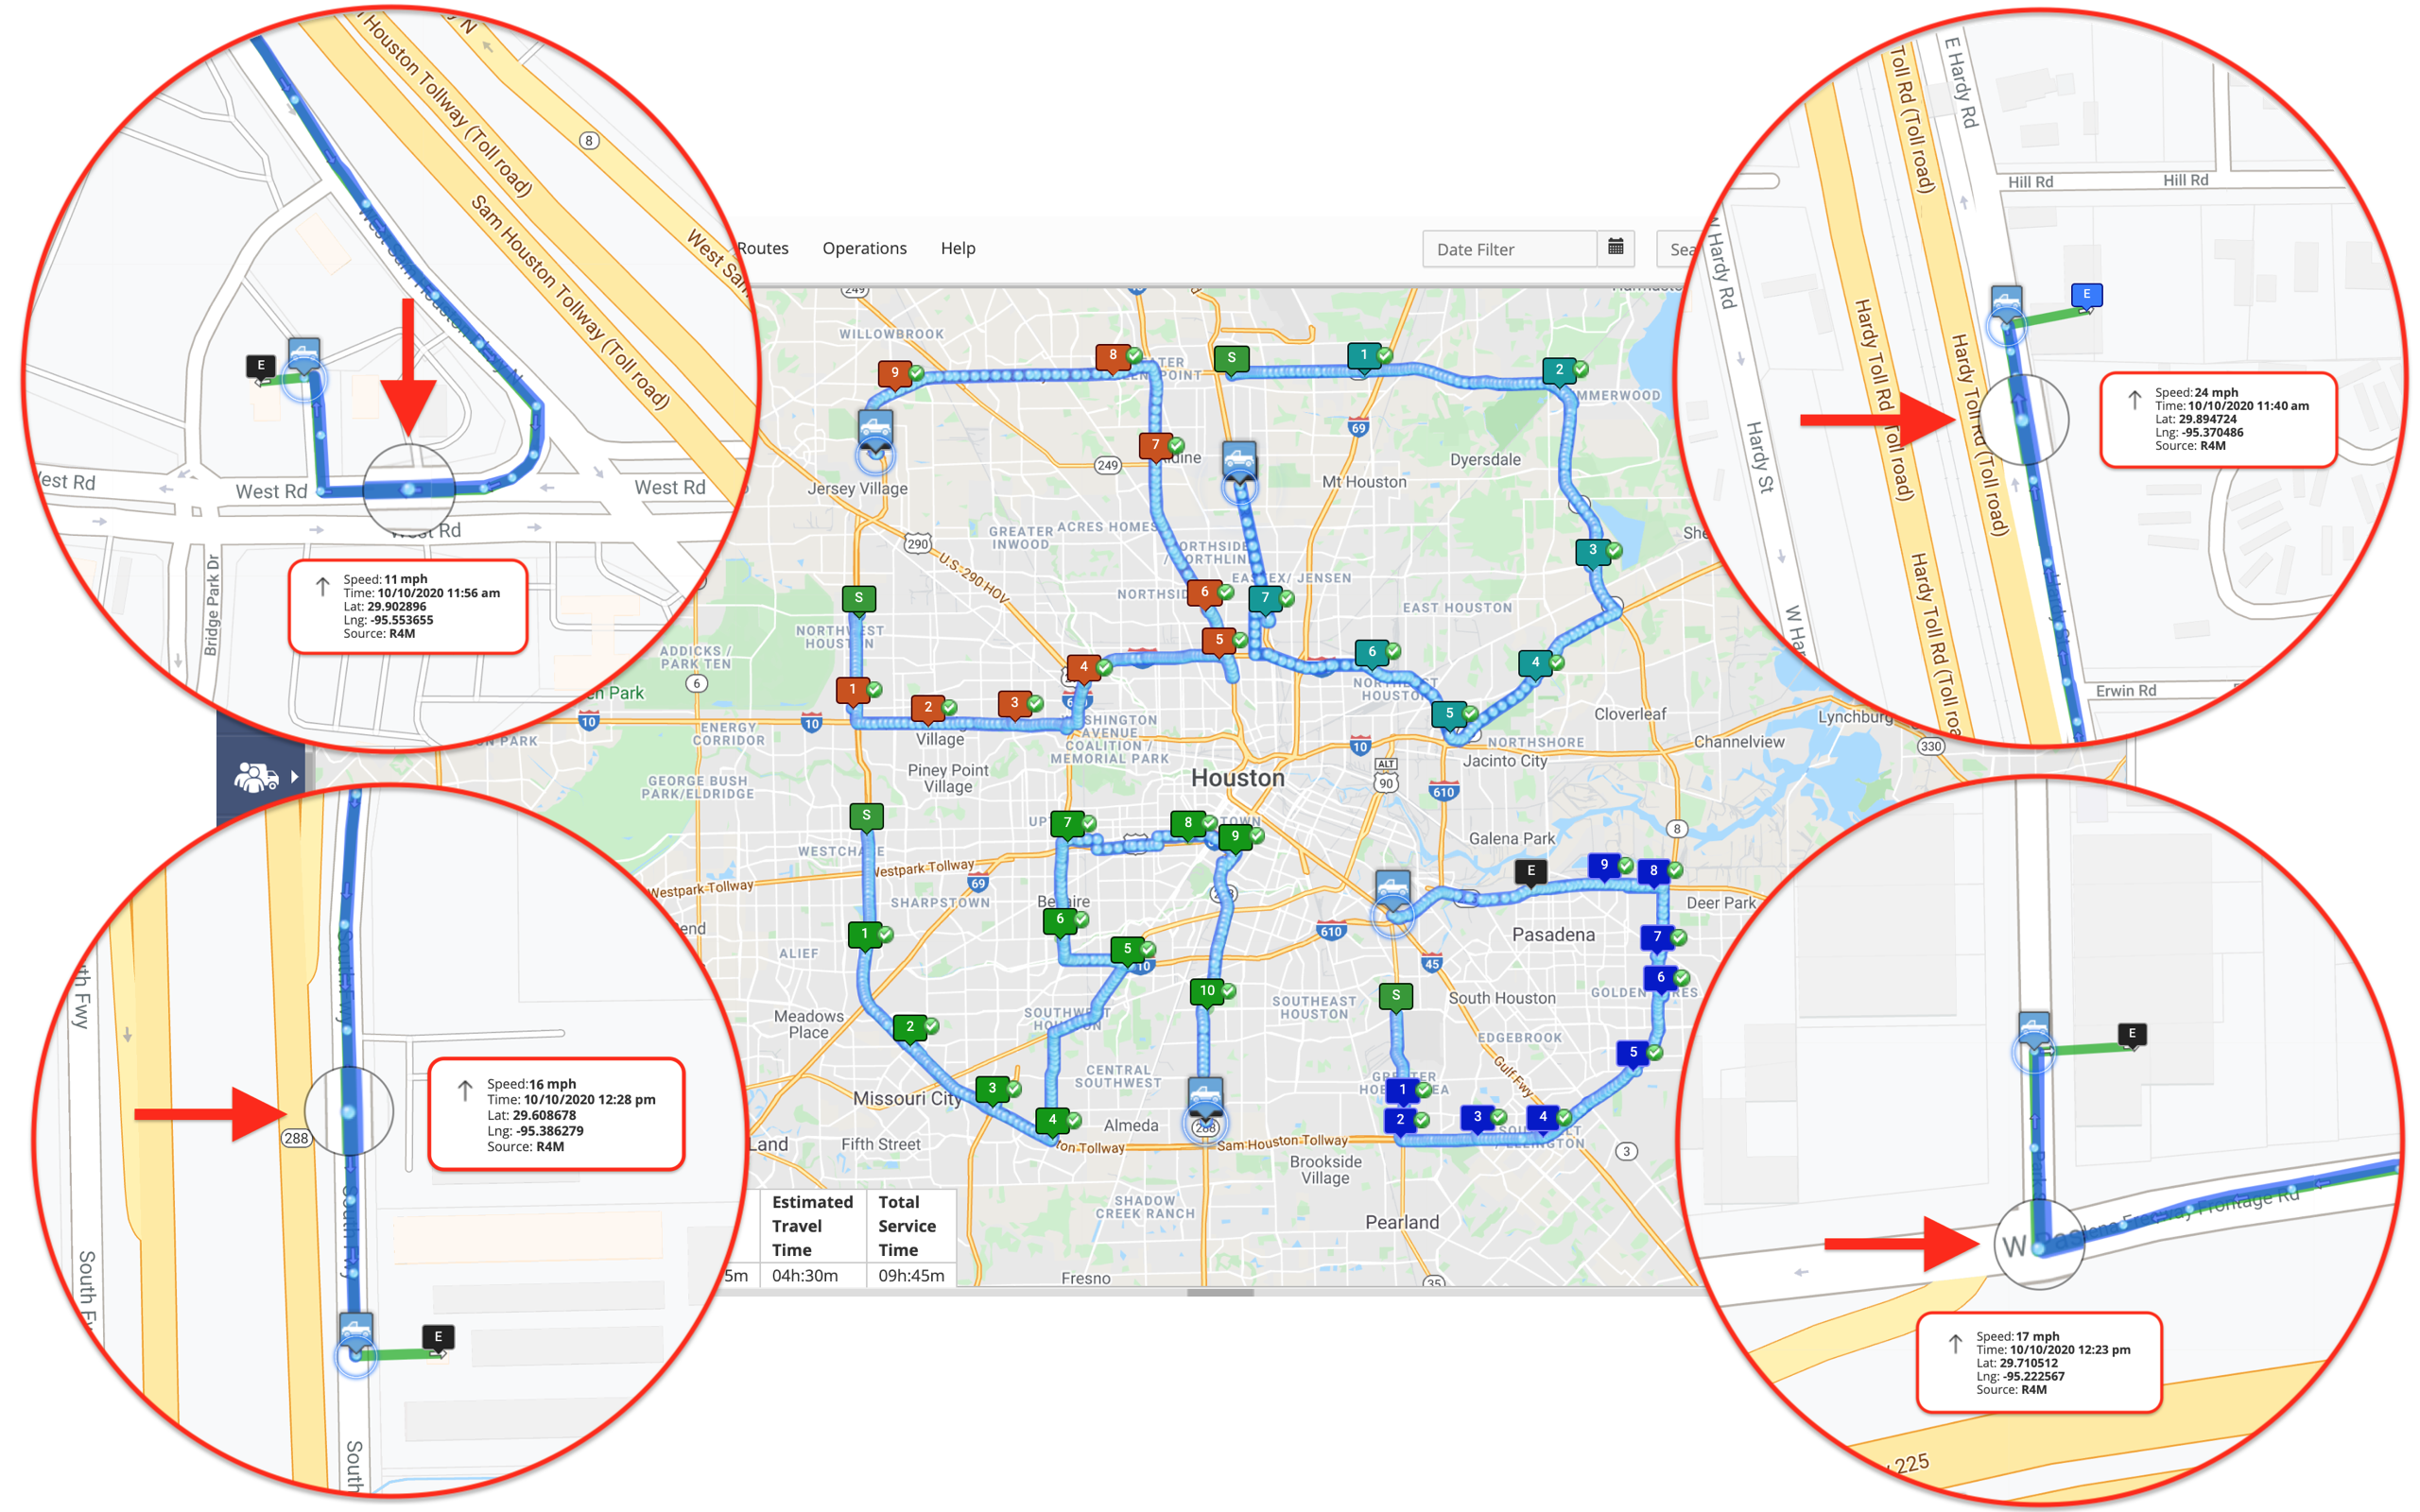 Driver tracking for multiple delivery drivers simultaneously on the same map using Route4Me's route planning software.